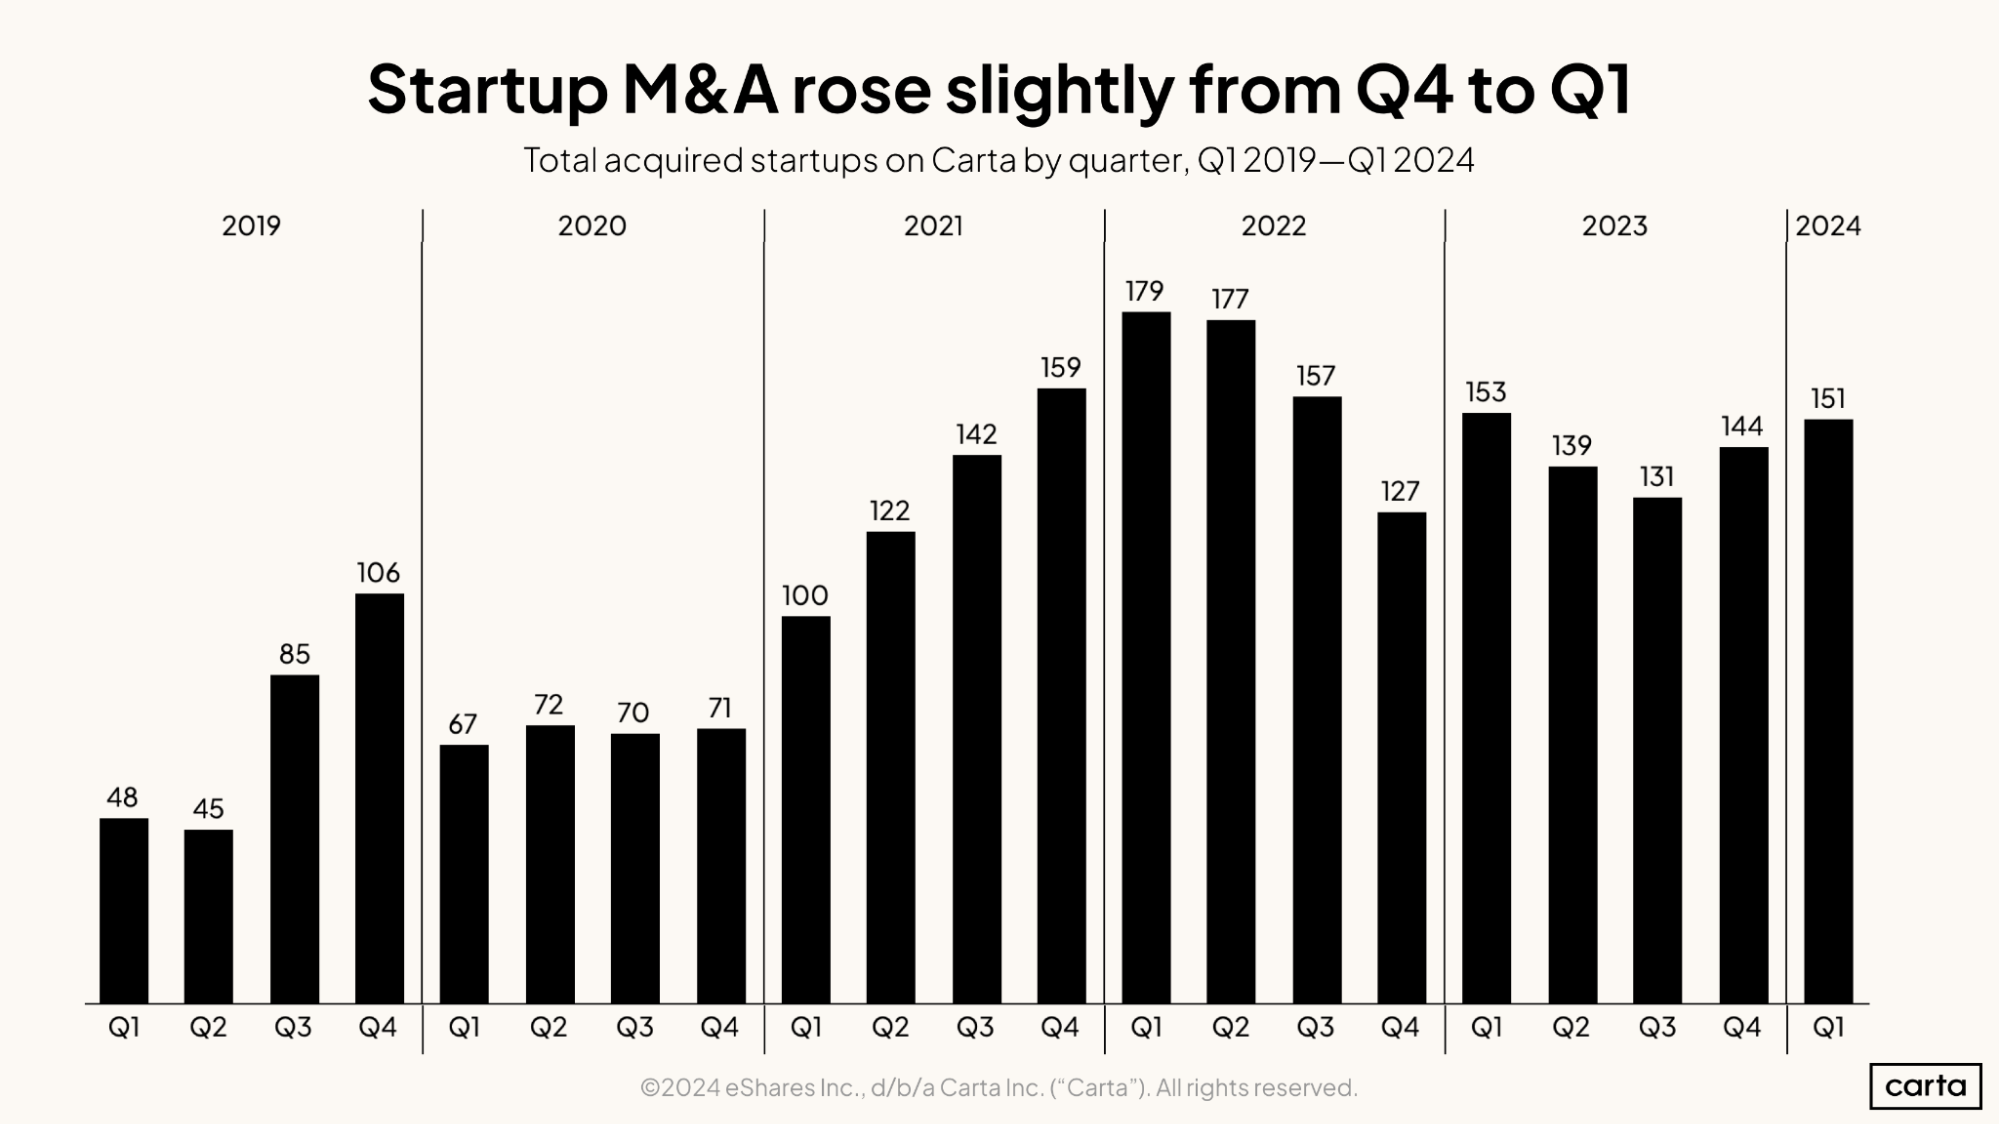 Startup M&A rose slightly from Q4 to Q1